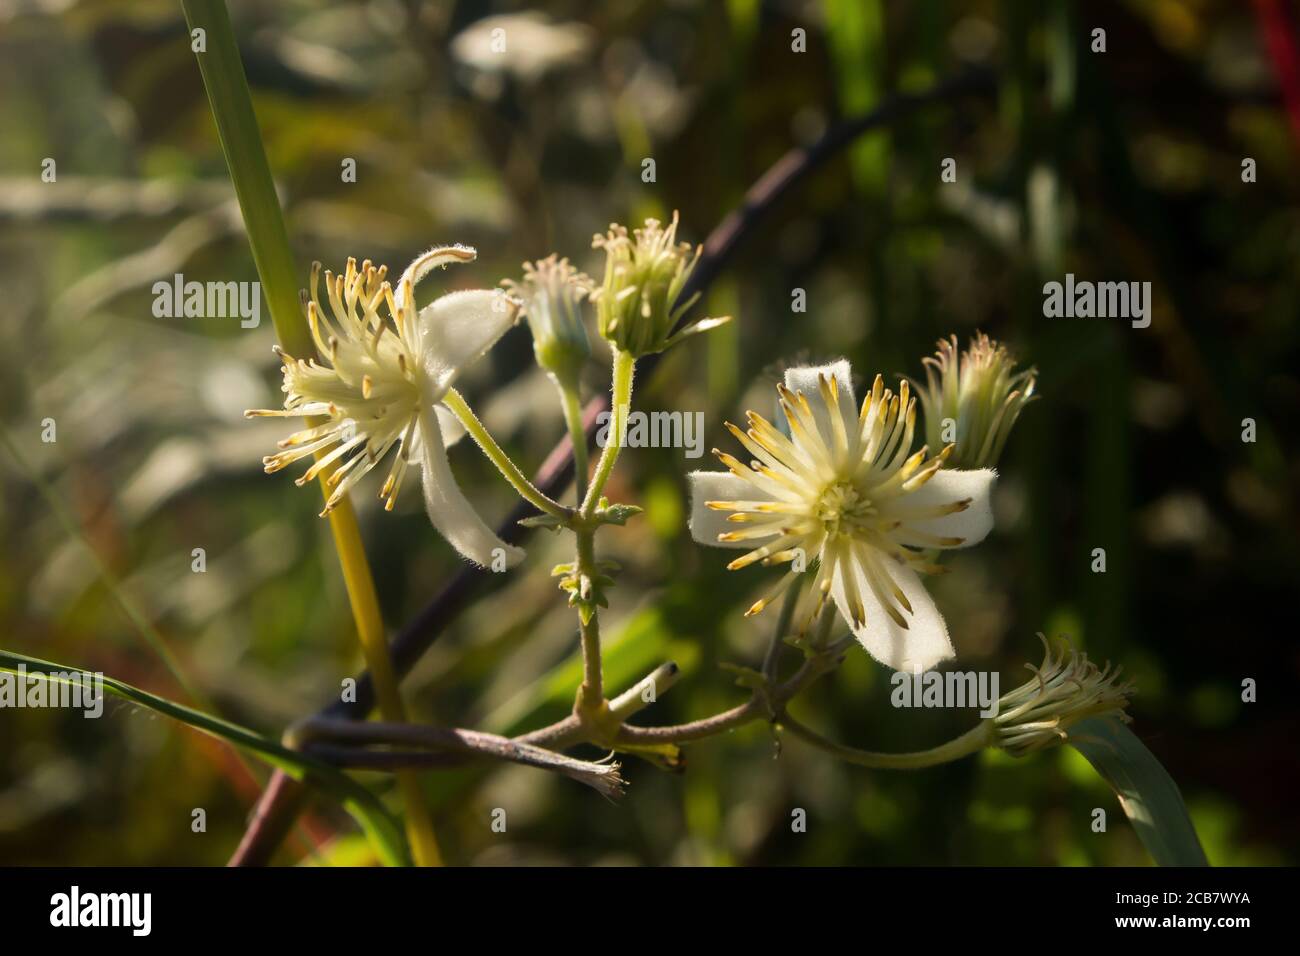 The small delicate flowers of the Clematis Brachiata, a vine commonly known as Travelers Joy due to its medicinal properties, backlit by the afternoon Stock Photo